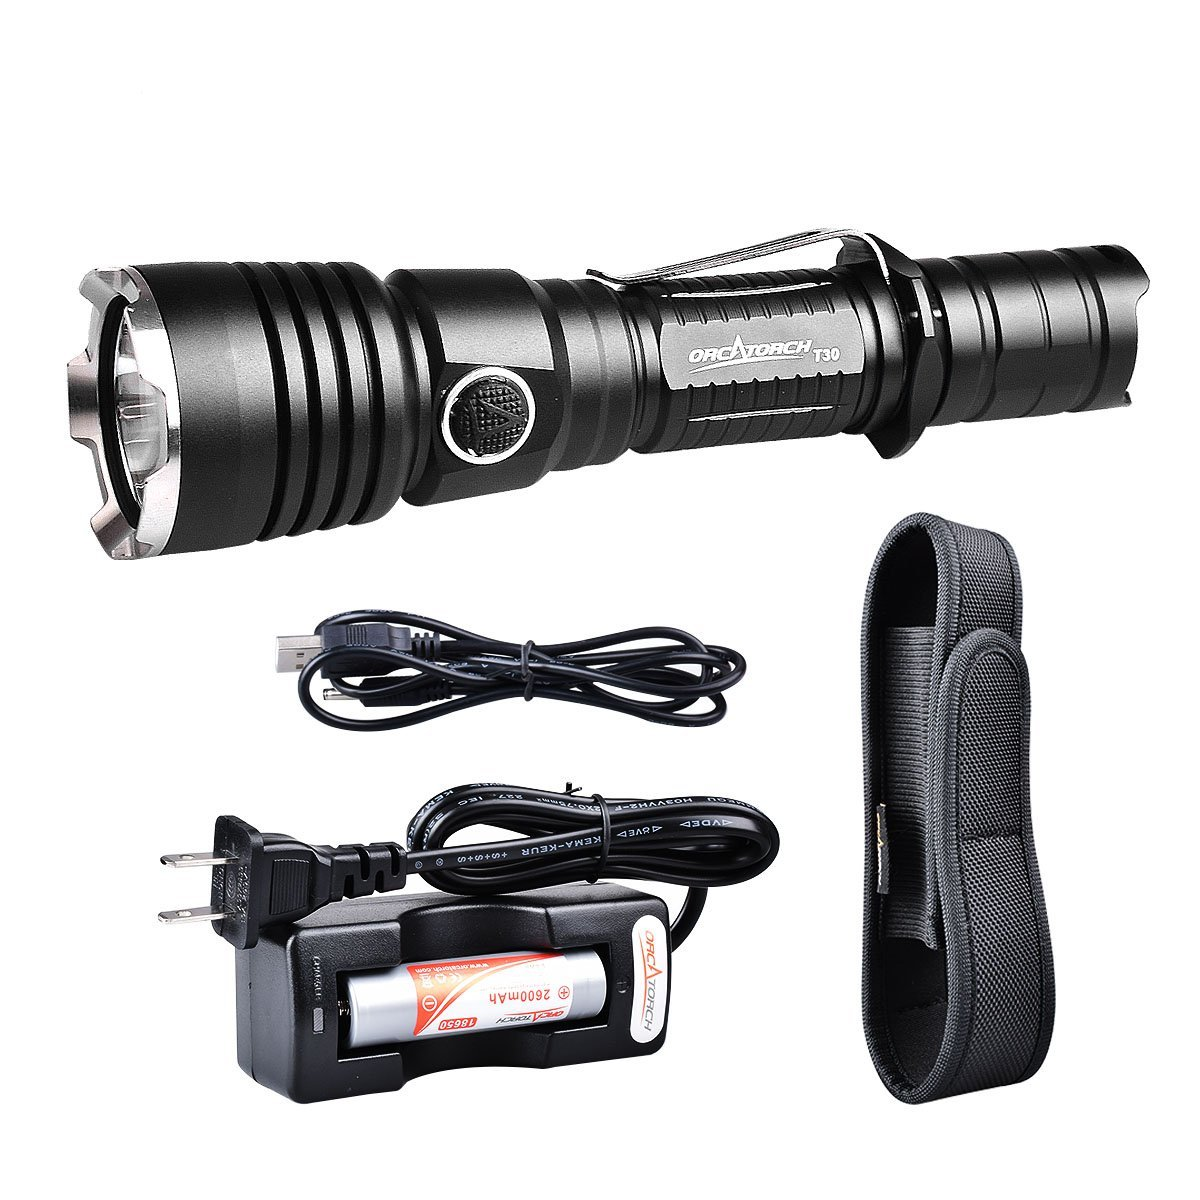 Orcatorch T30 Tactical Flashlight Review